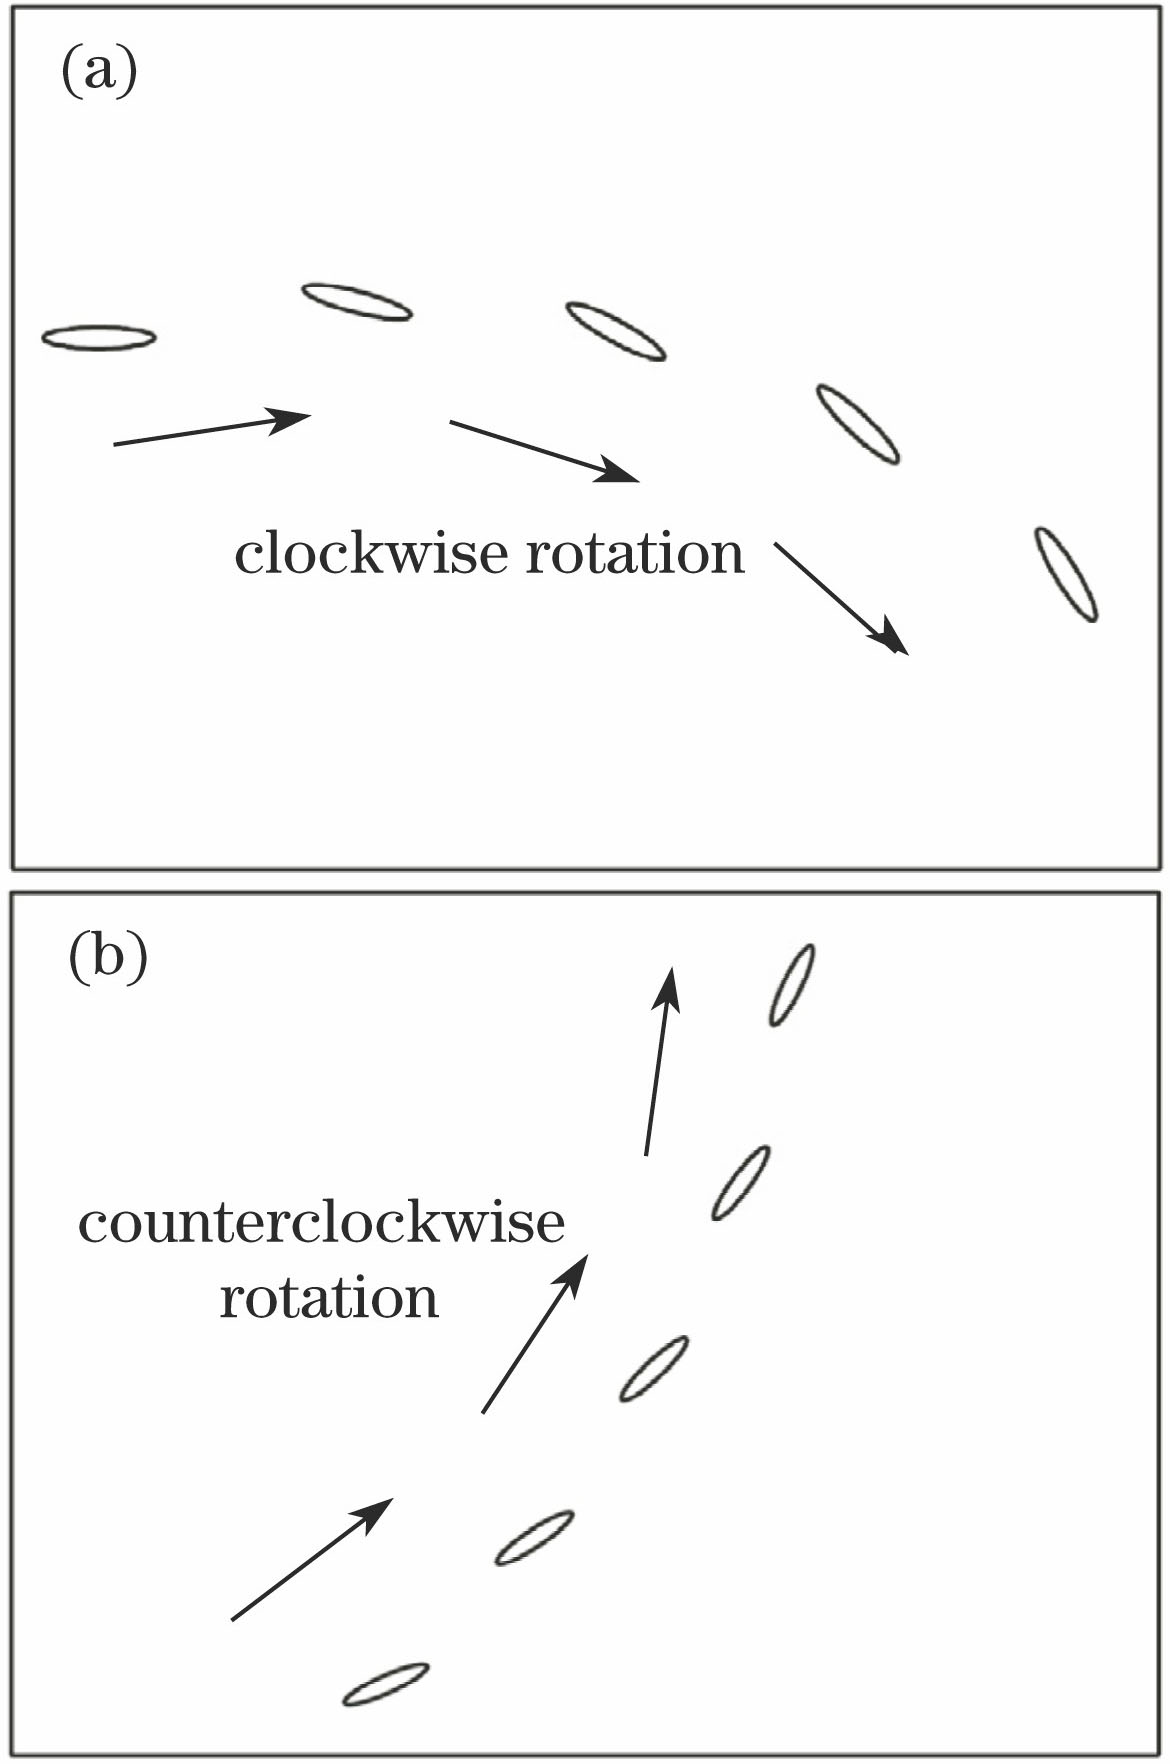 Illustrative examples of maneuvering extended object. (a) Clockwise rotation; (b) counterclockwise rotation